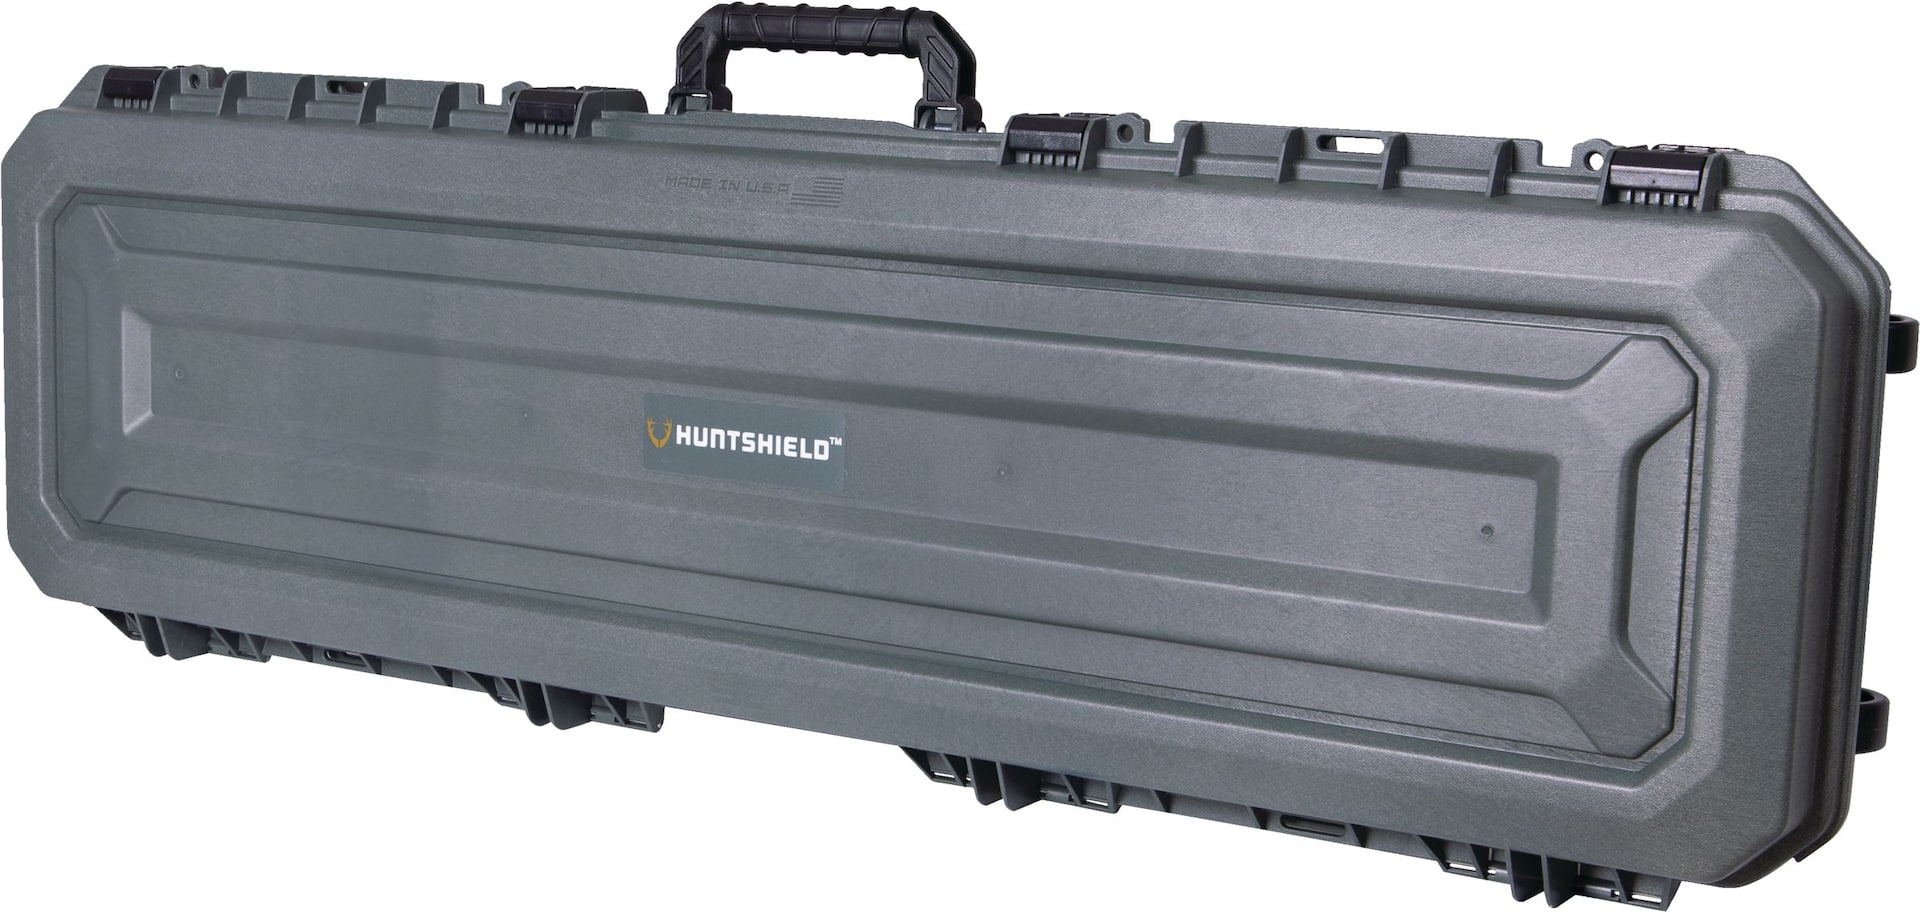 Huntshield All-Weather Double Rifle Carry Case, 52-in, Green